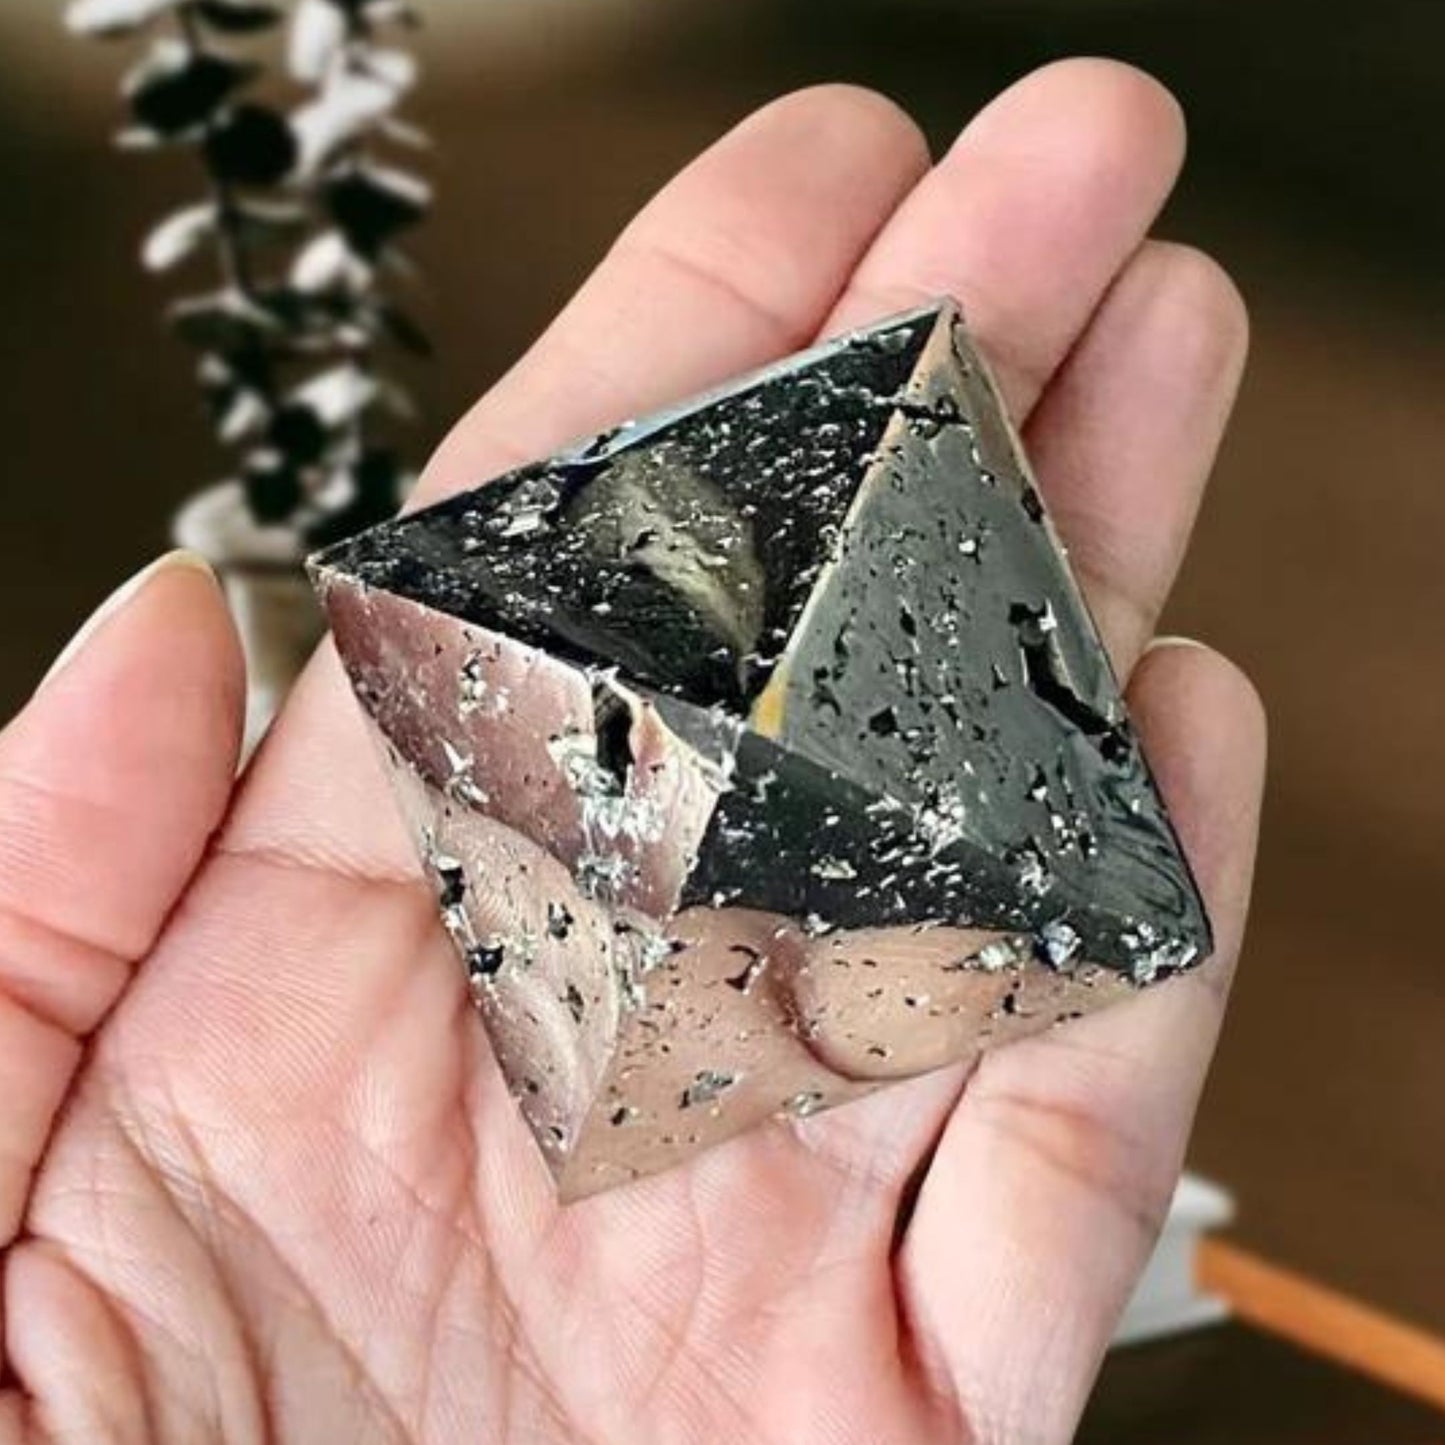 PYRITE PYRAMID FOR ATTRACTING MONEY